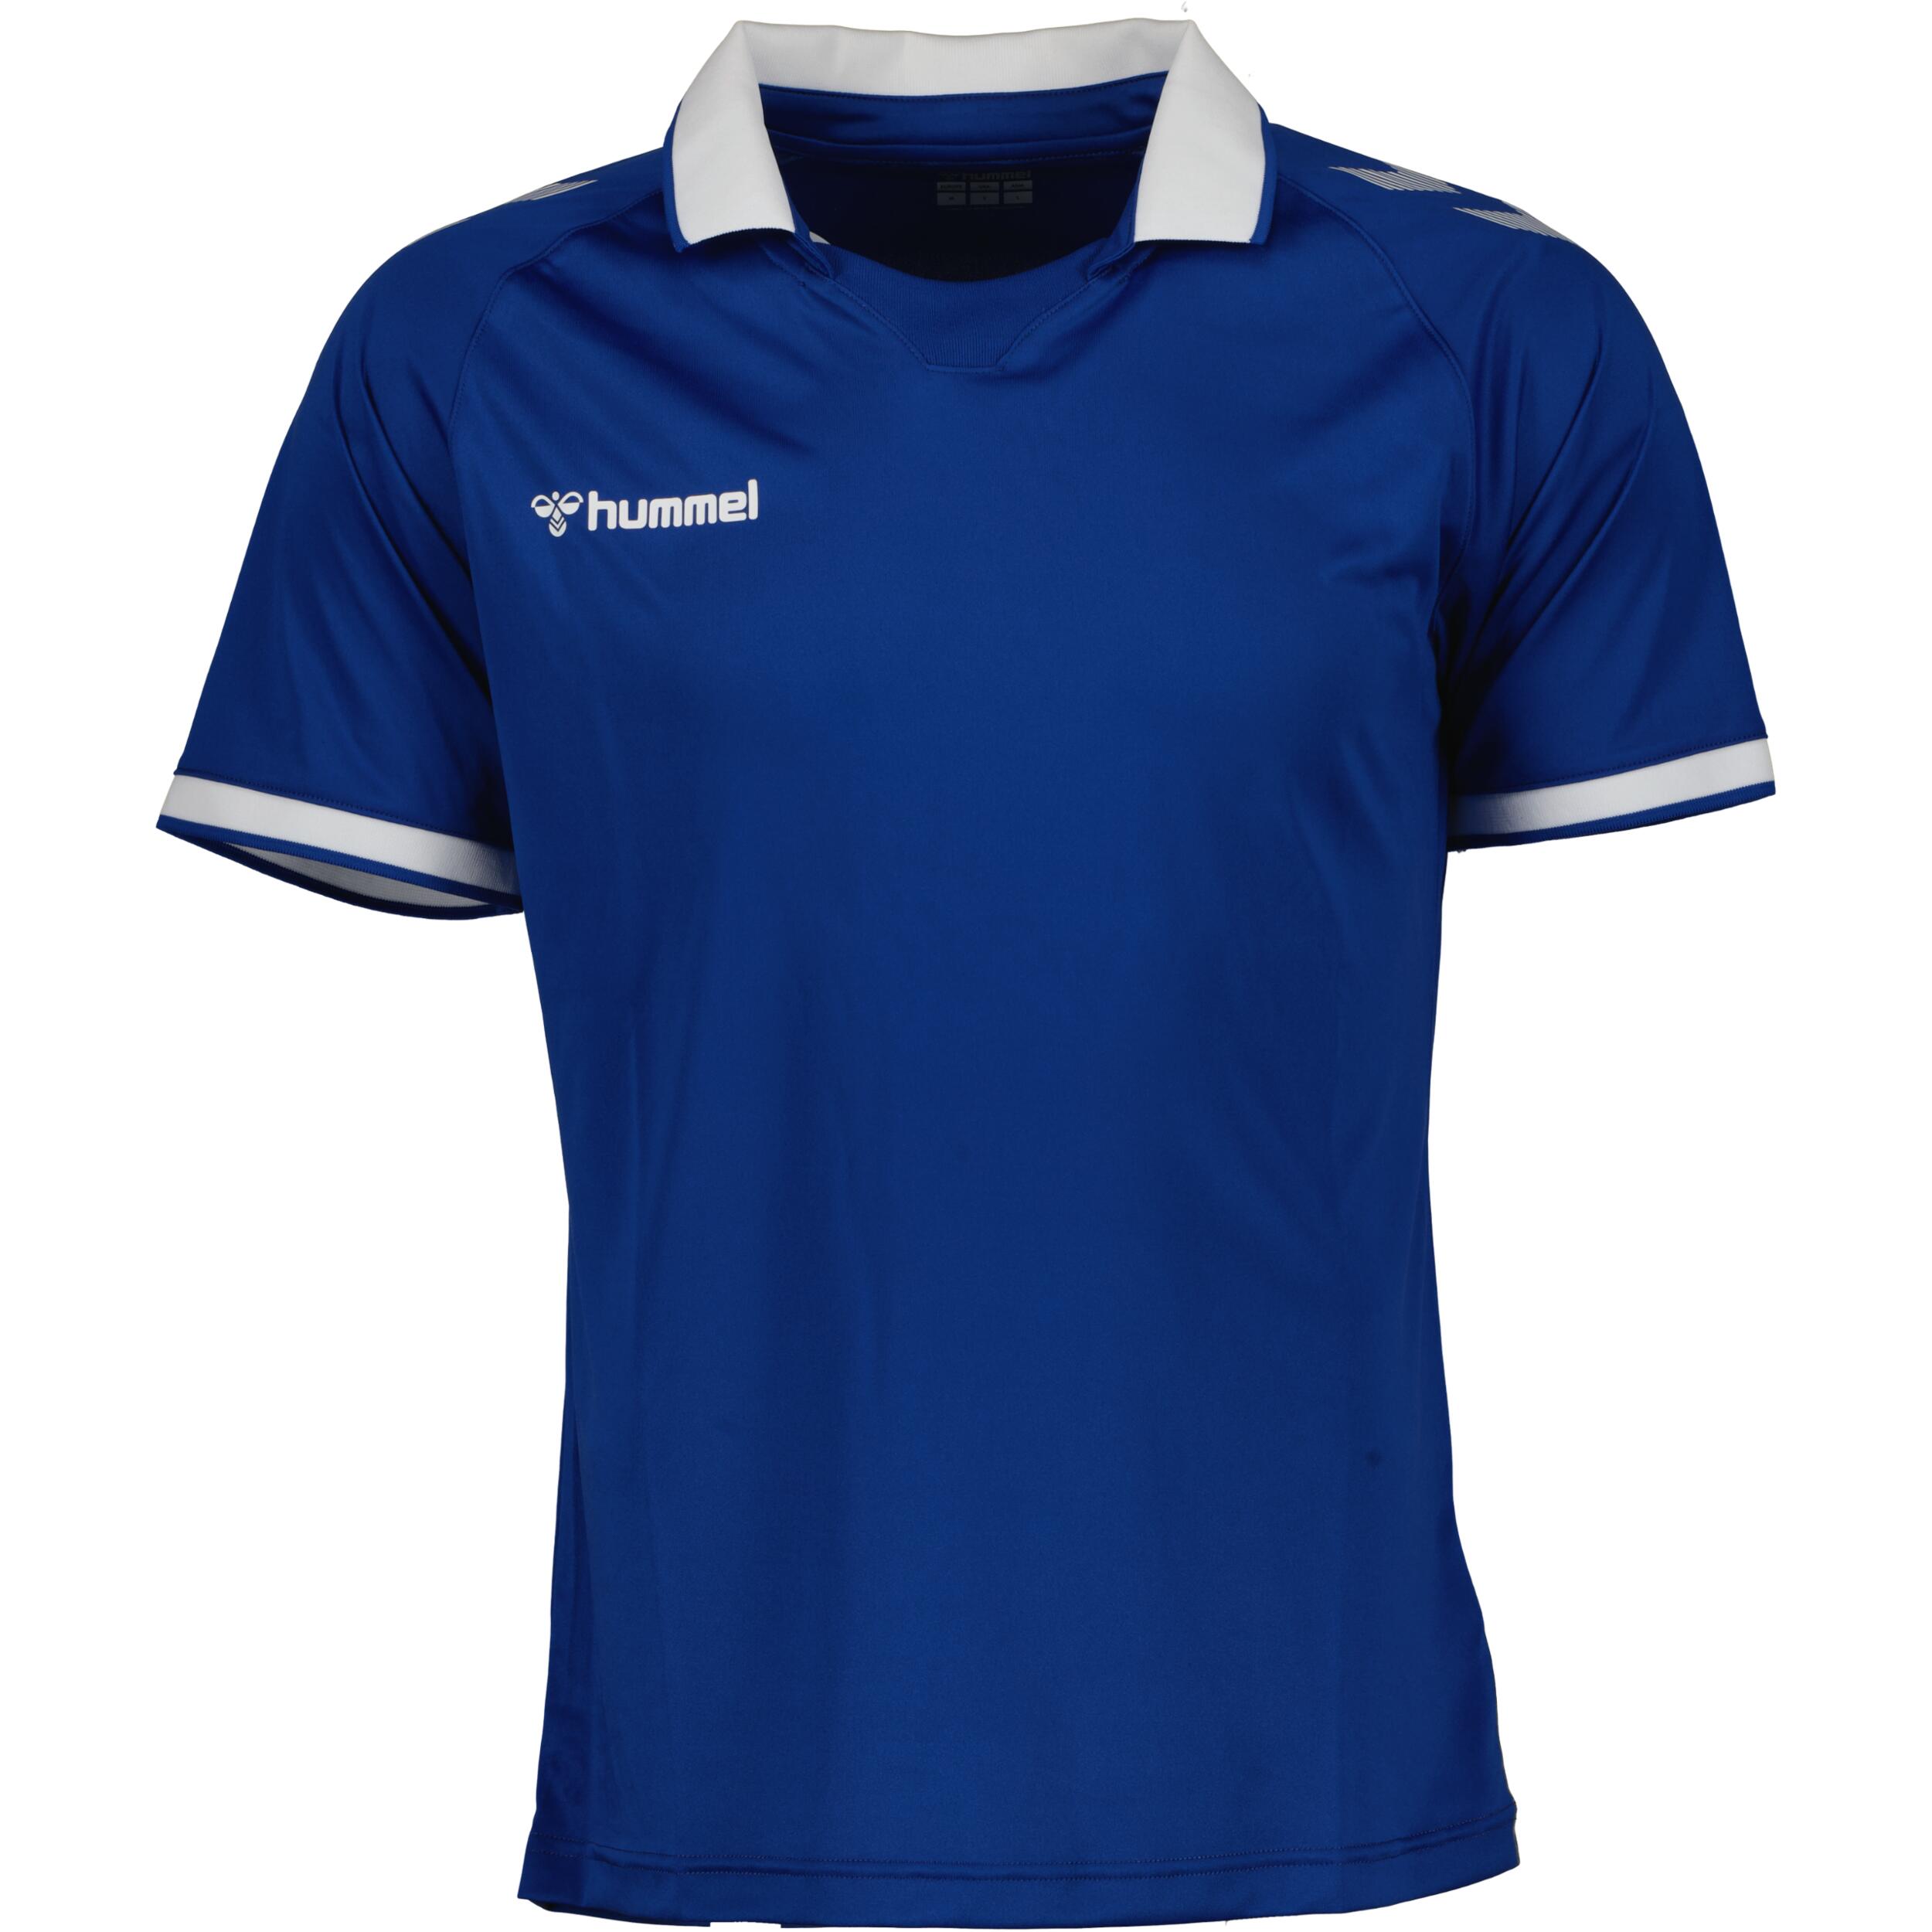 Impact jersey for juniors, great for football, in blue/white 1/3